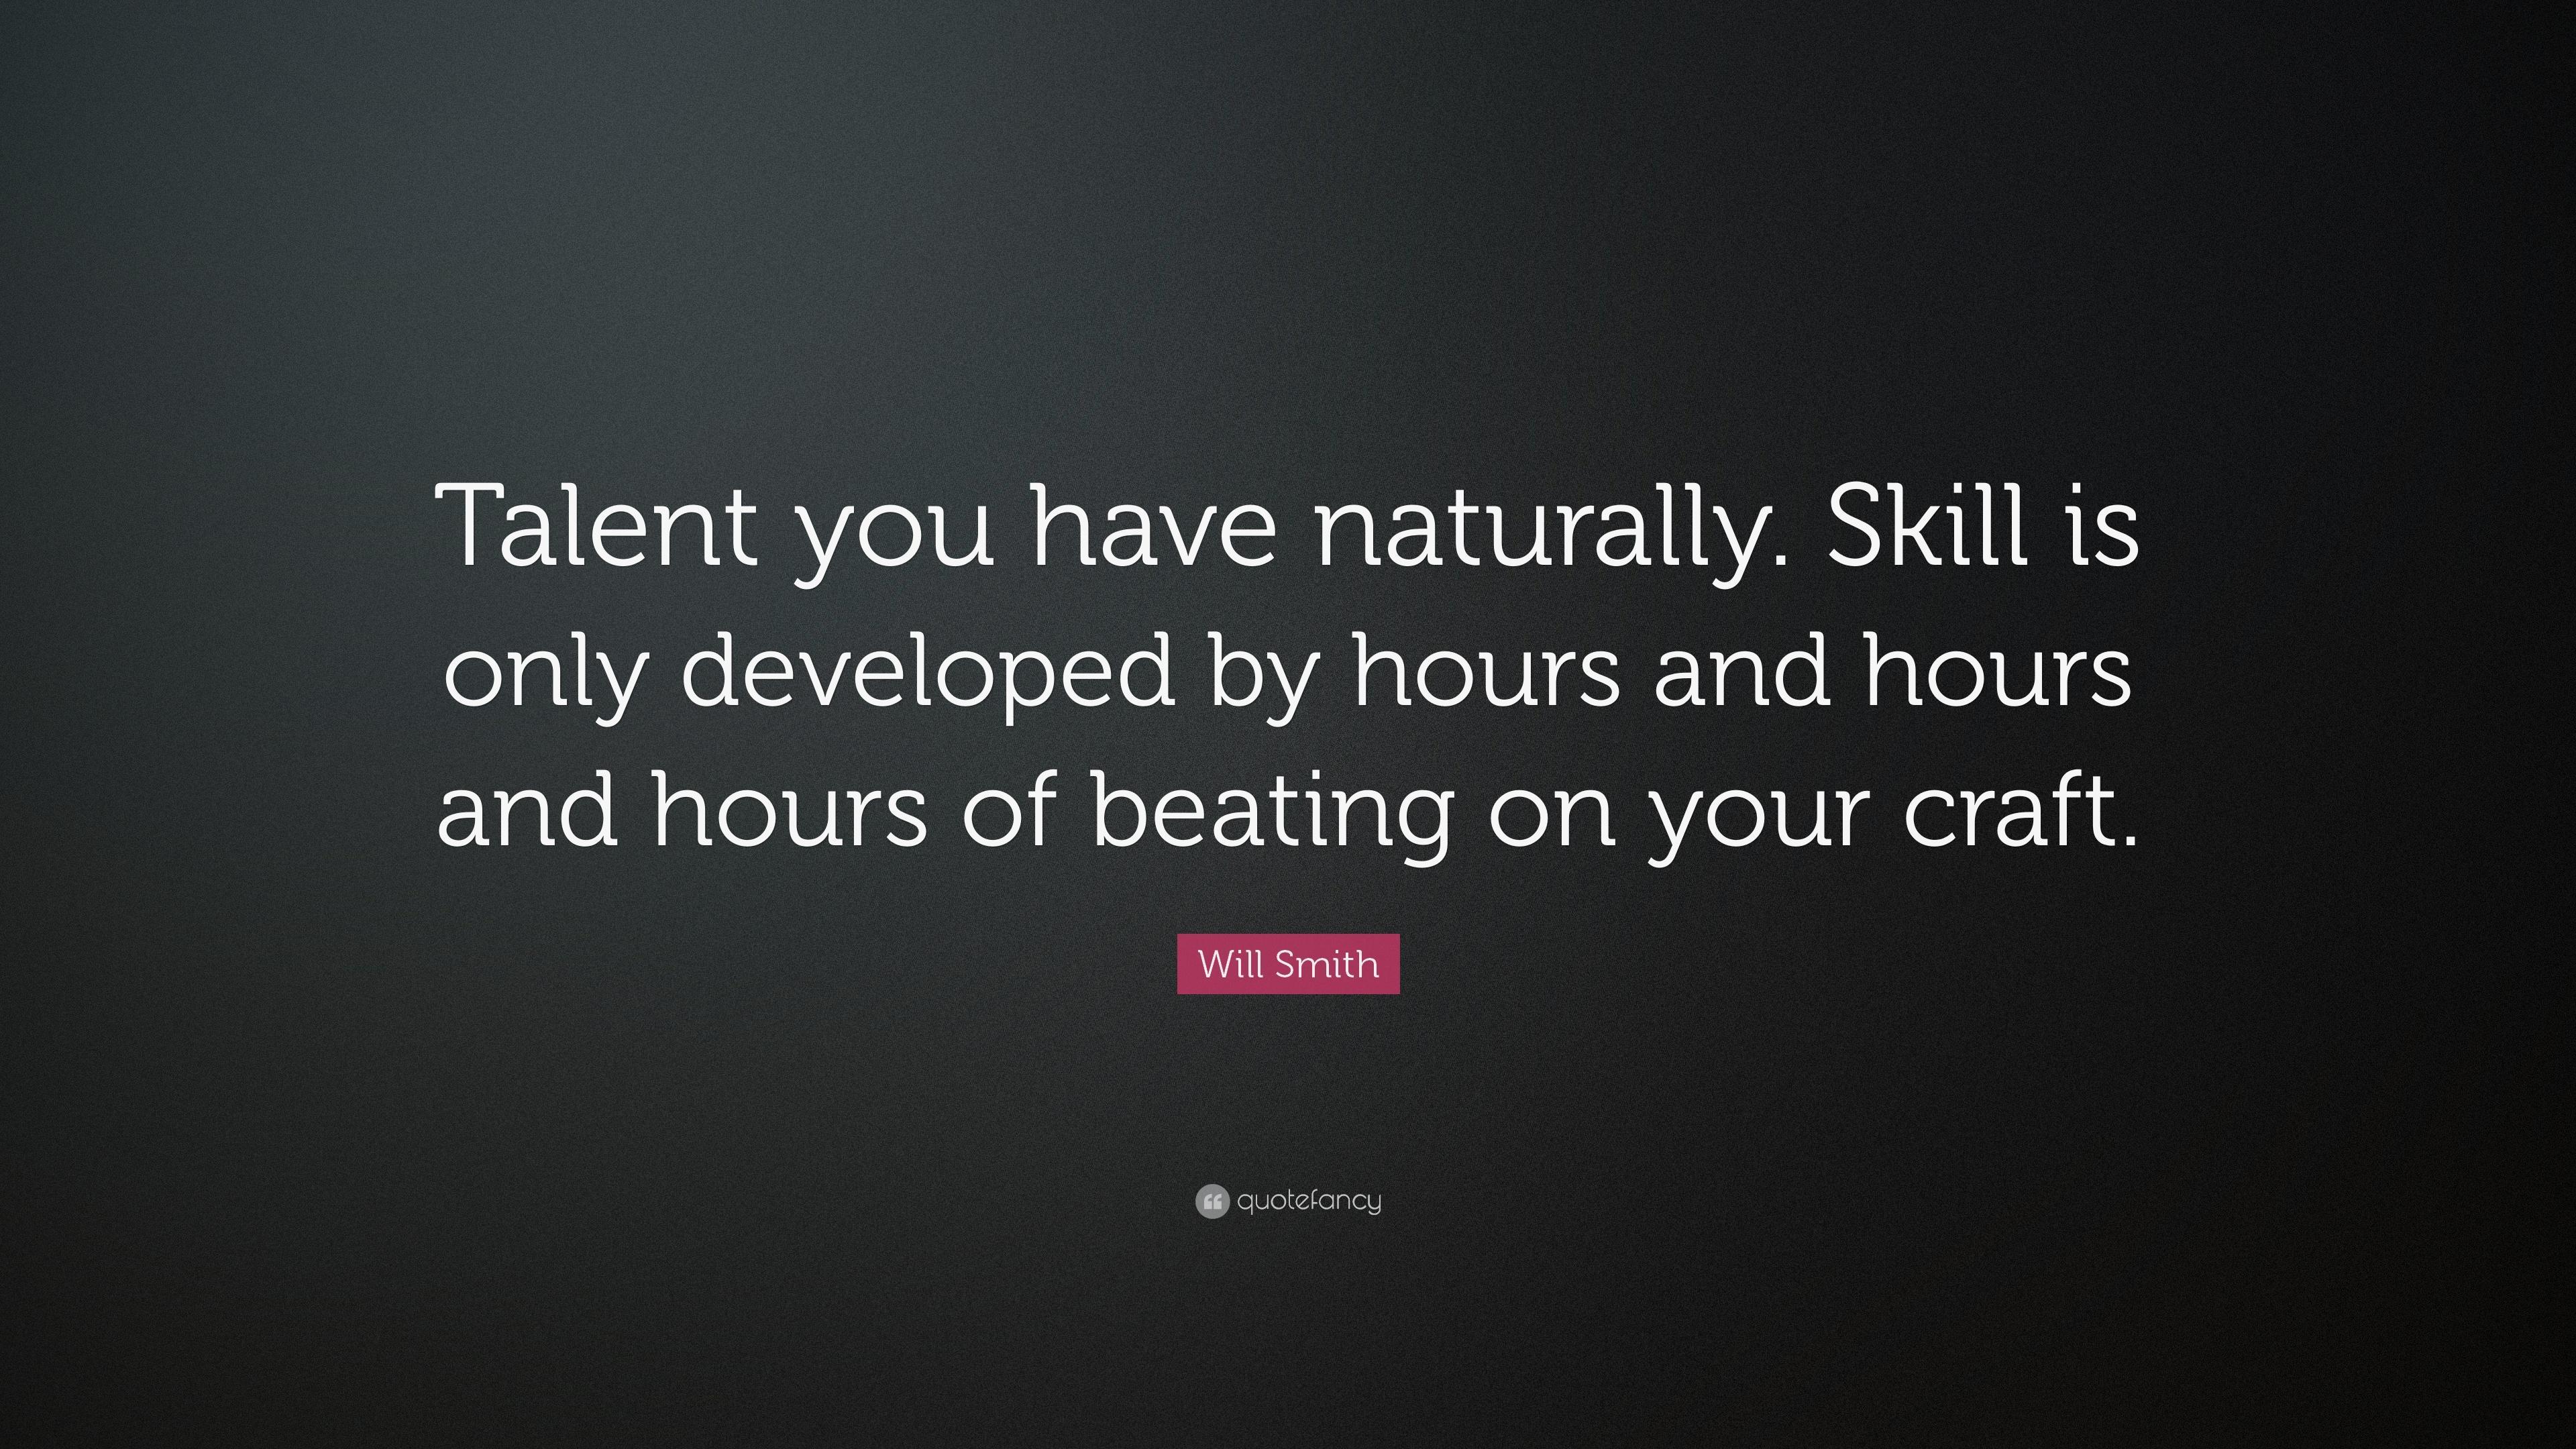 Will Smith Quote: “Talent you have naturally. Skill is only